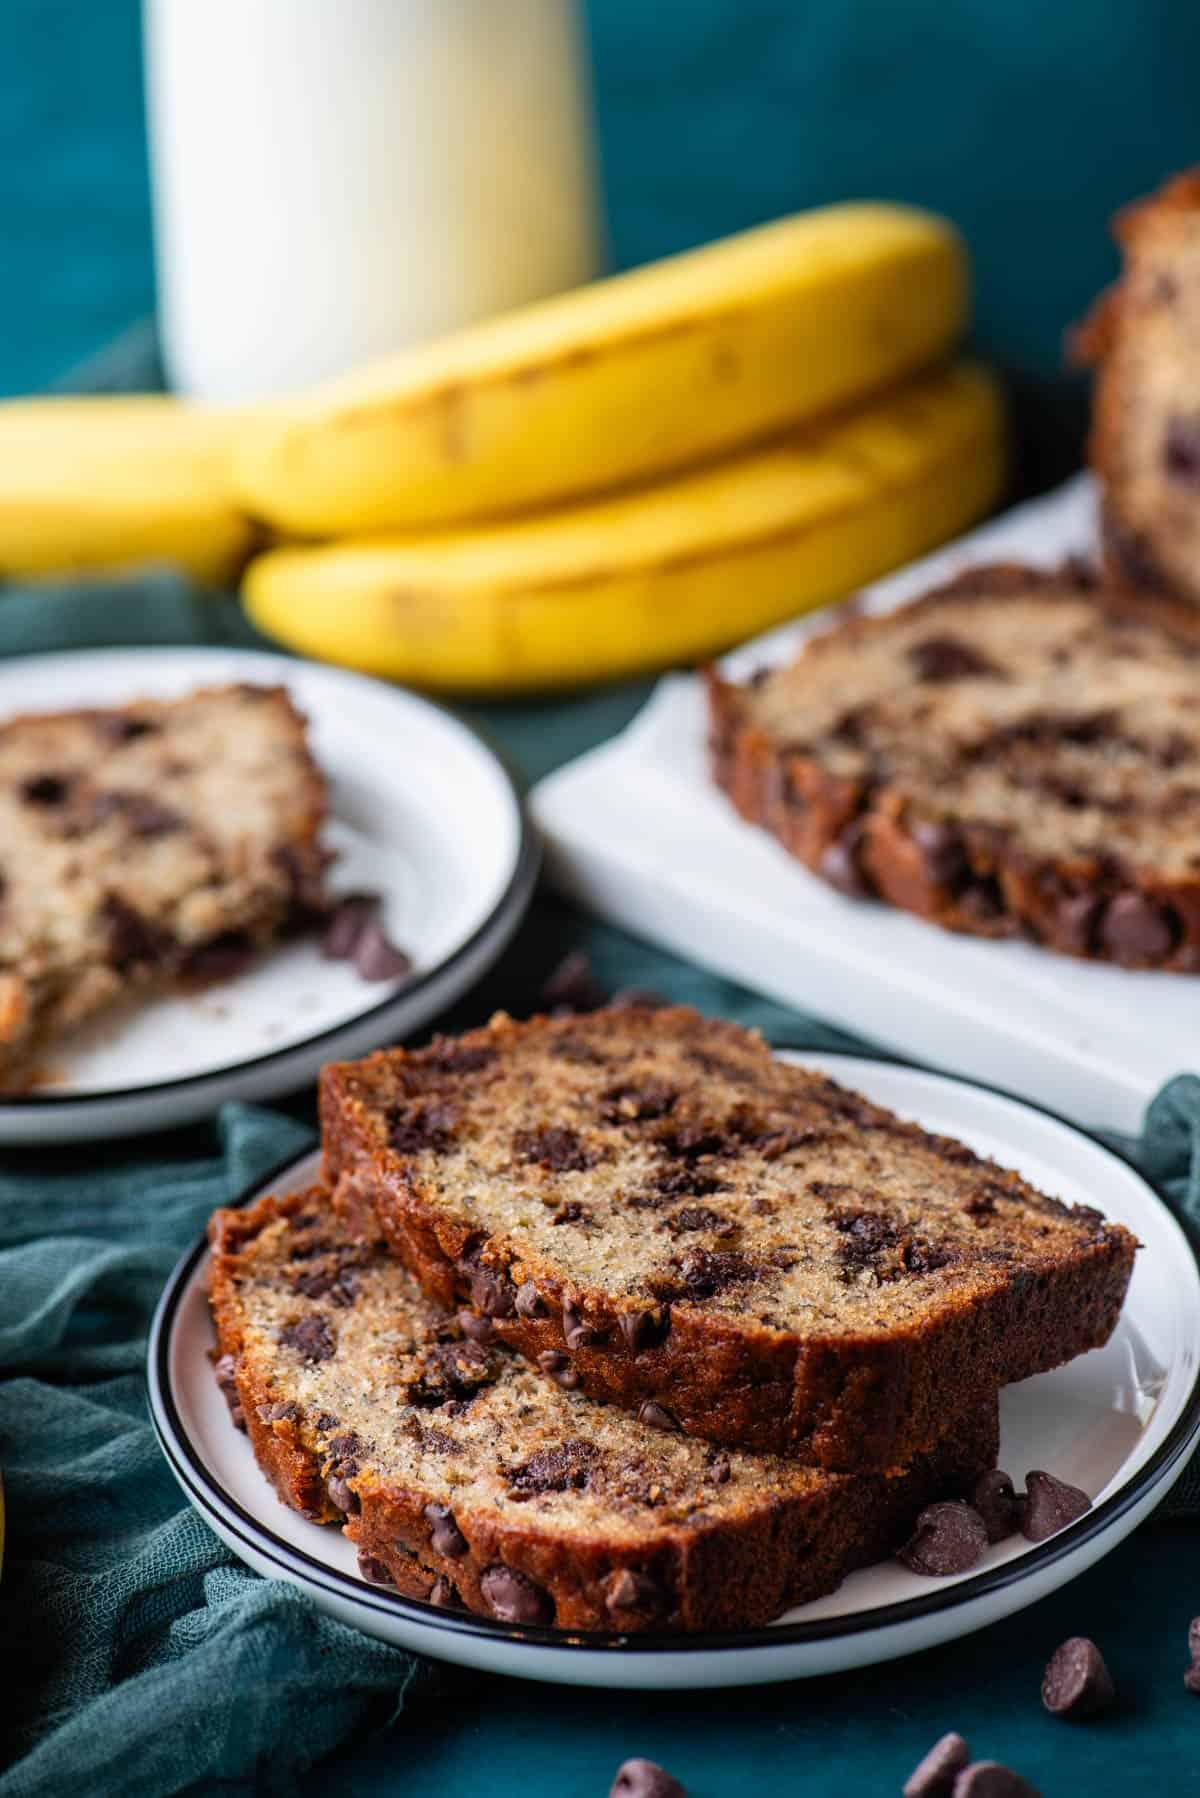 two slices of chocolate chip banana bread on a white plate on top of a dark teal towel, with whole bananas beside it, another plate with a slice of banana bread, and a white cutting board with more bread on it behind it